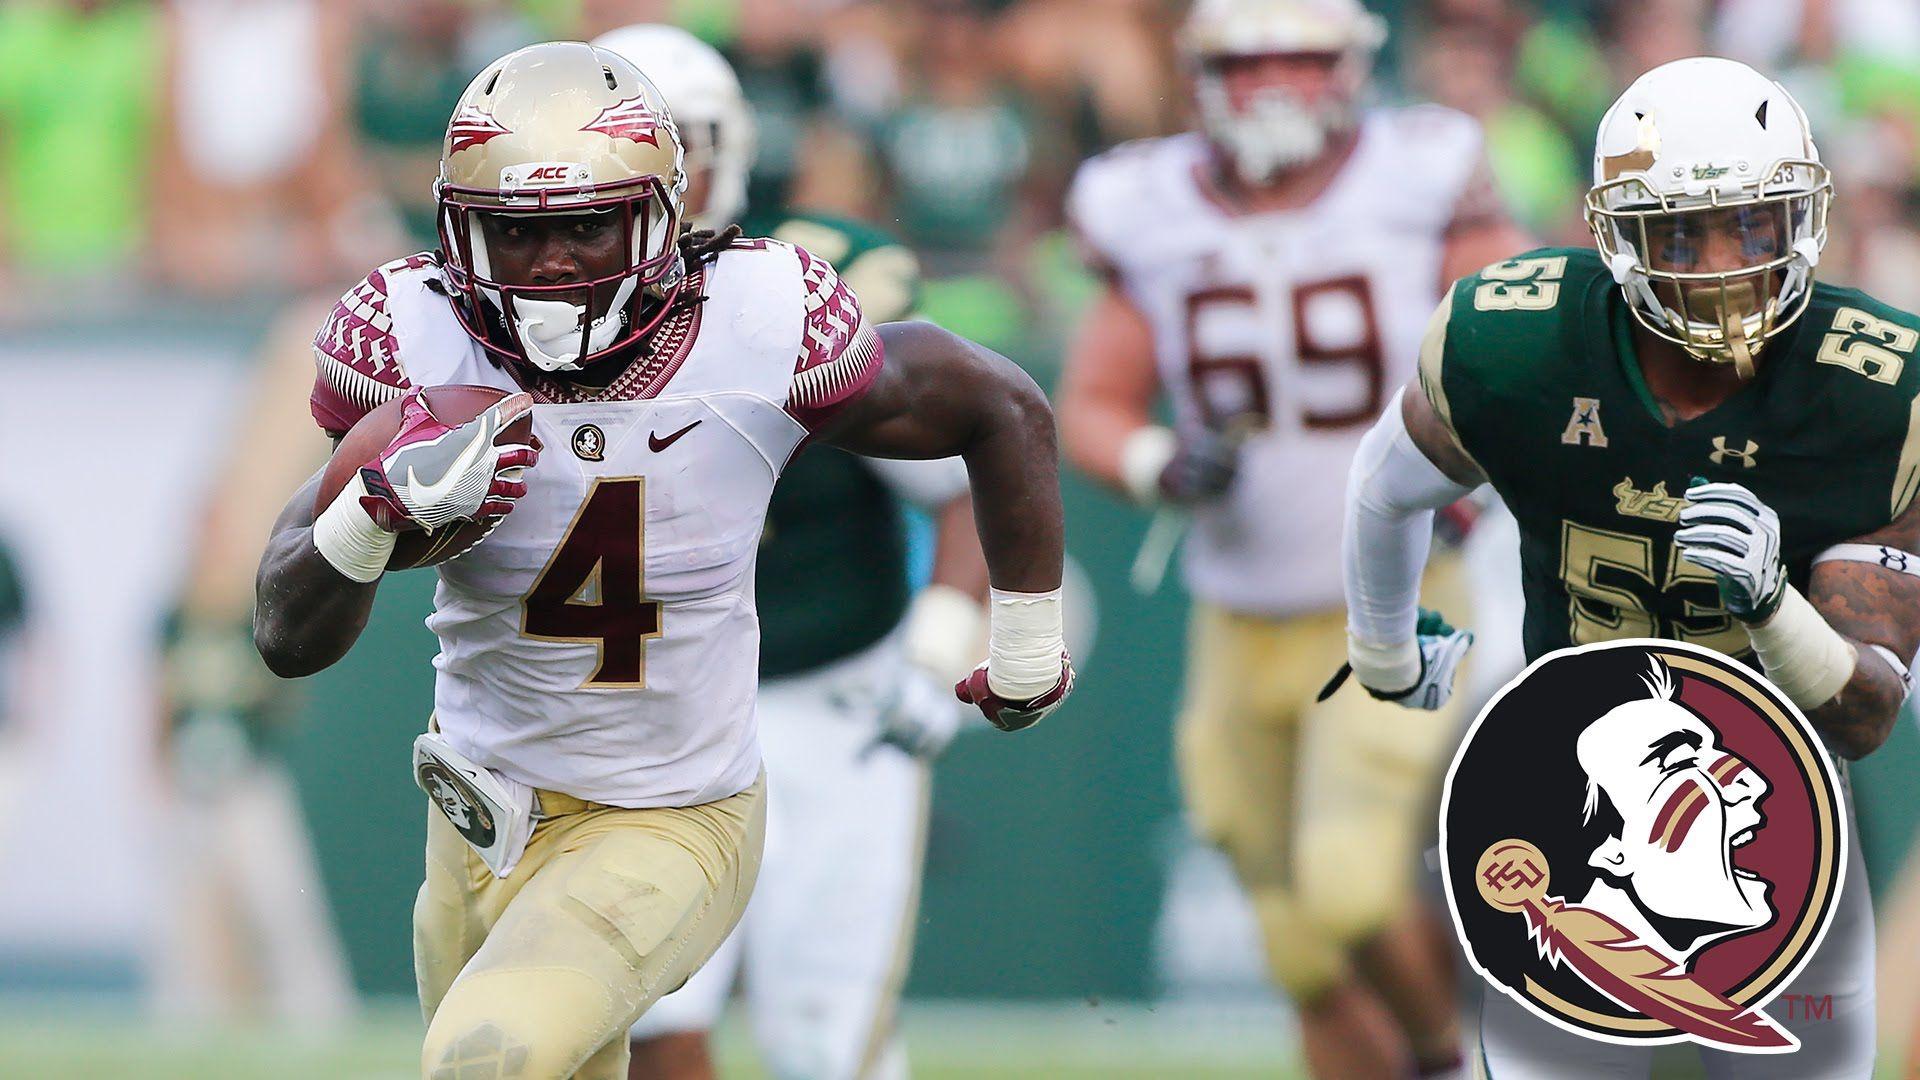 Dalvin Cook: Best Plays In Career High Rushing Day For FSU Vs USF